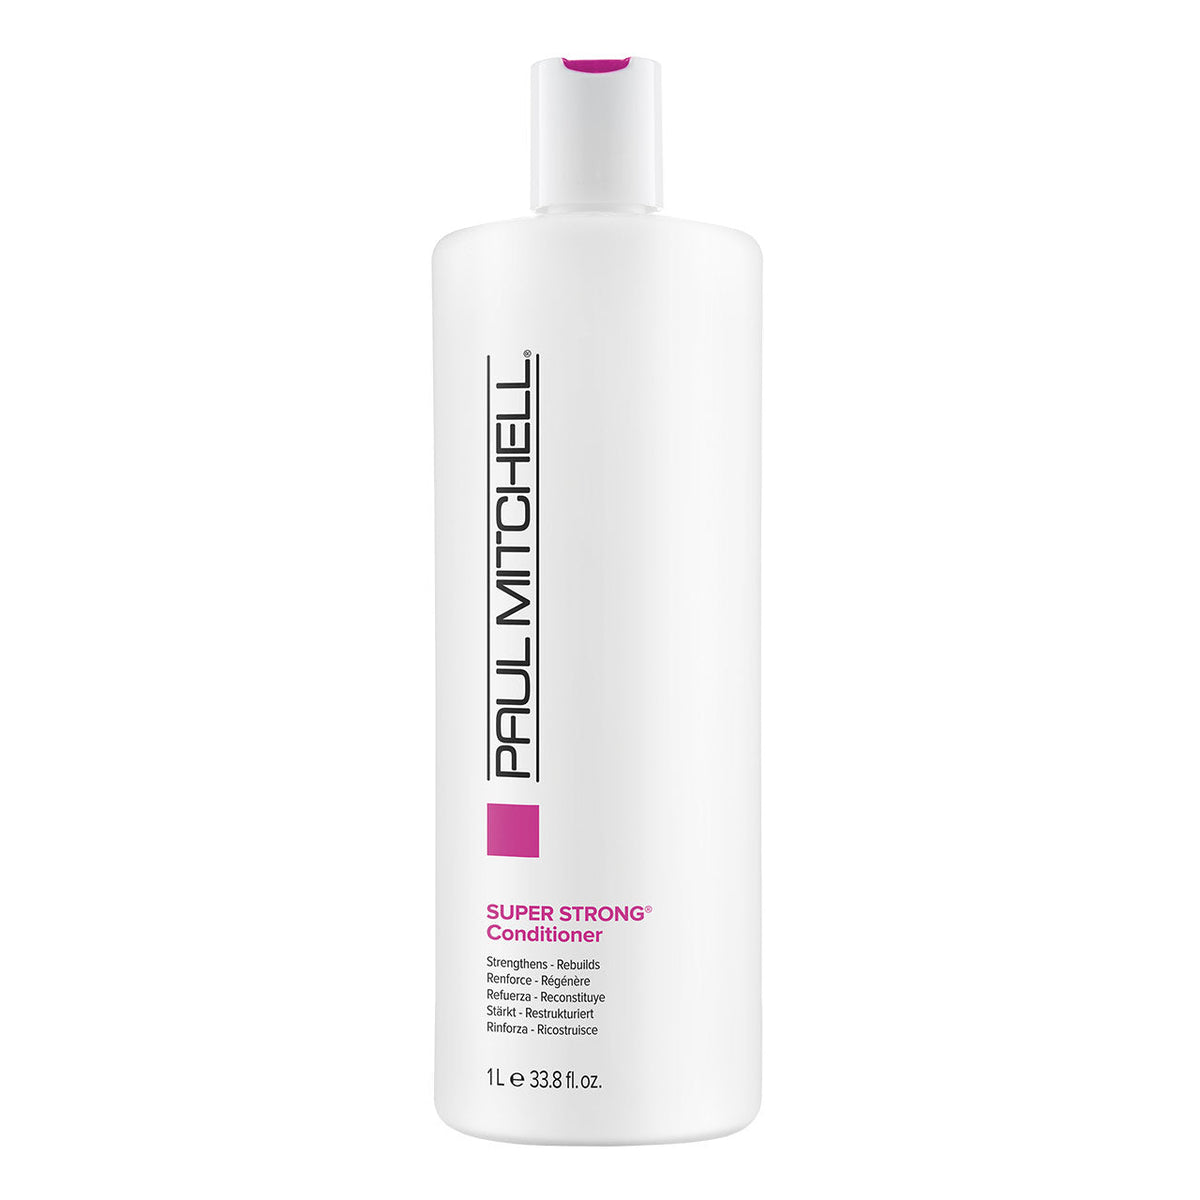 Super Strong Conditioner - 1L - by Paul Mitchell |ProCare Outlet|